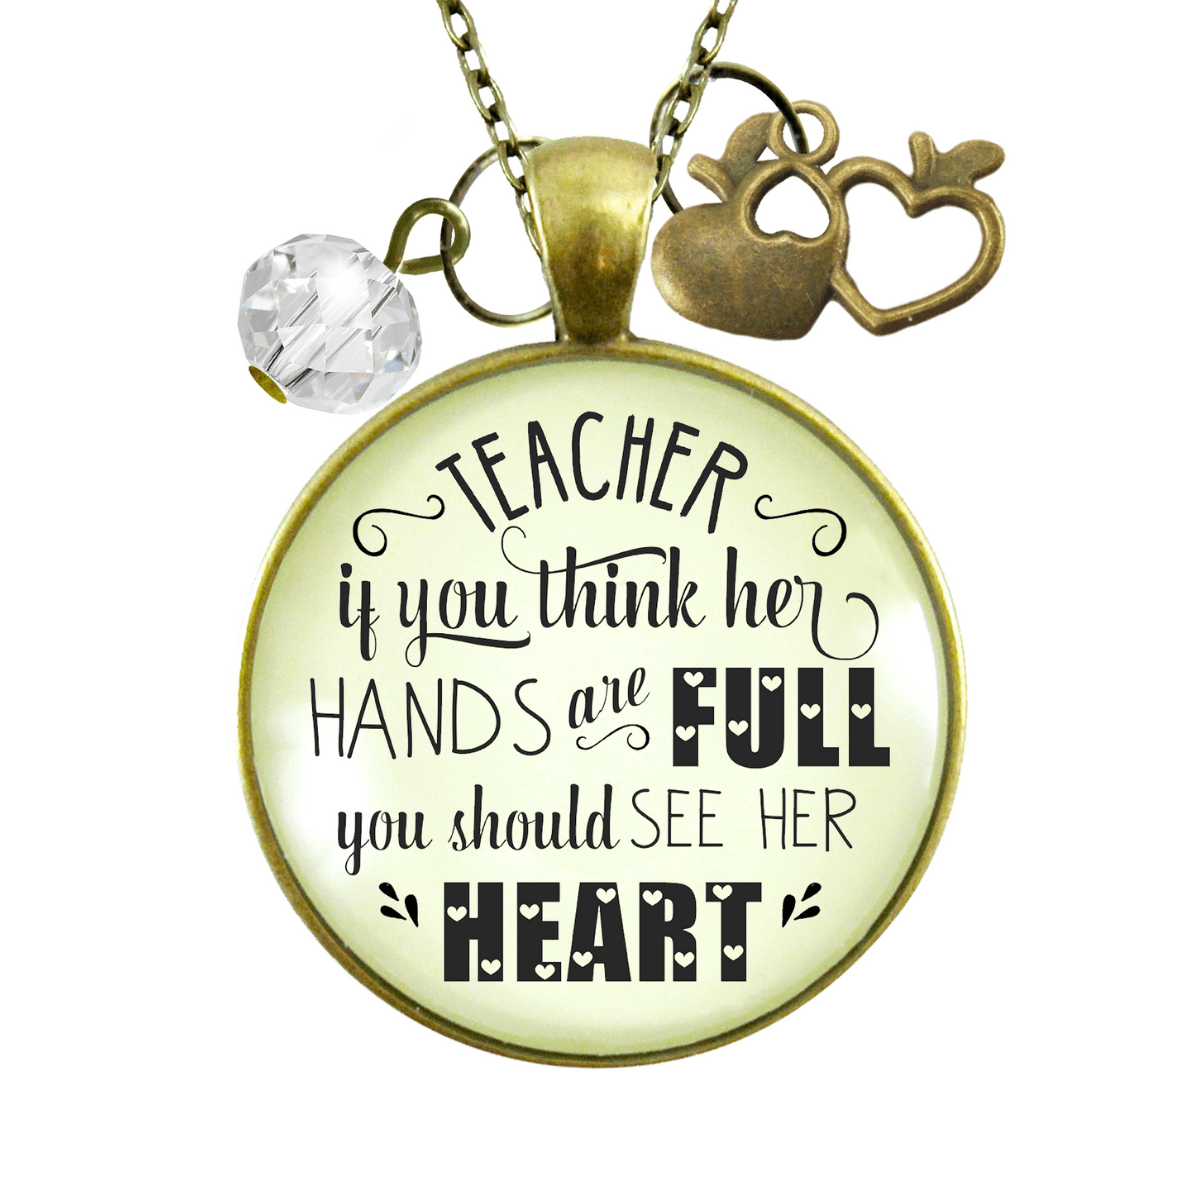 Gutsy Goodness Teacher Necklace See Her Heart School Quote Jewelry Gift Apple Charm - Gutsy Goodness Handmade Jewelry;Teacher Necklace See Her Heart School Quote Jewelry Gift Apple Charm - Gutsy Goodness Handmade Jewelry Gifts